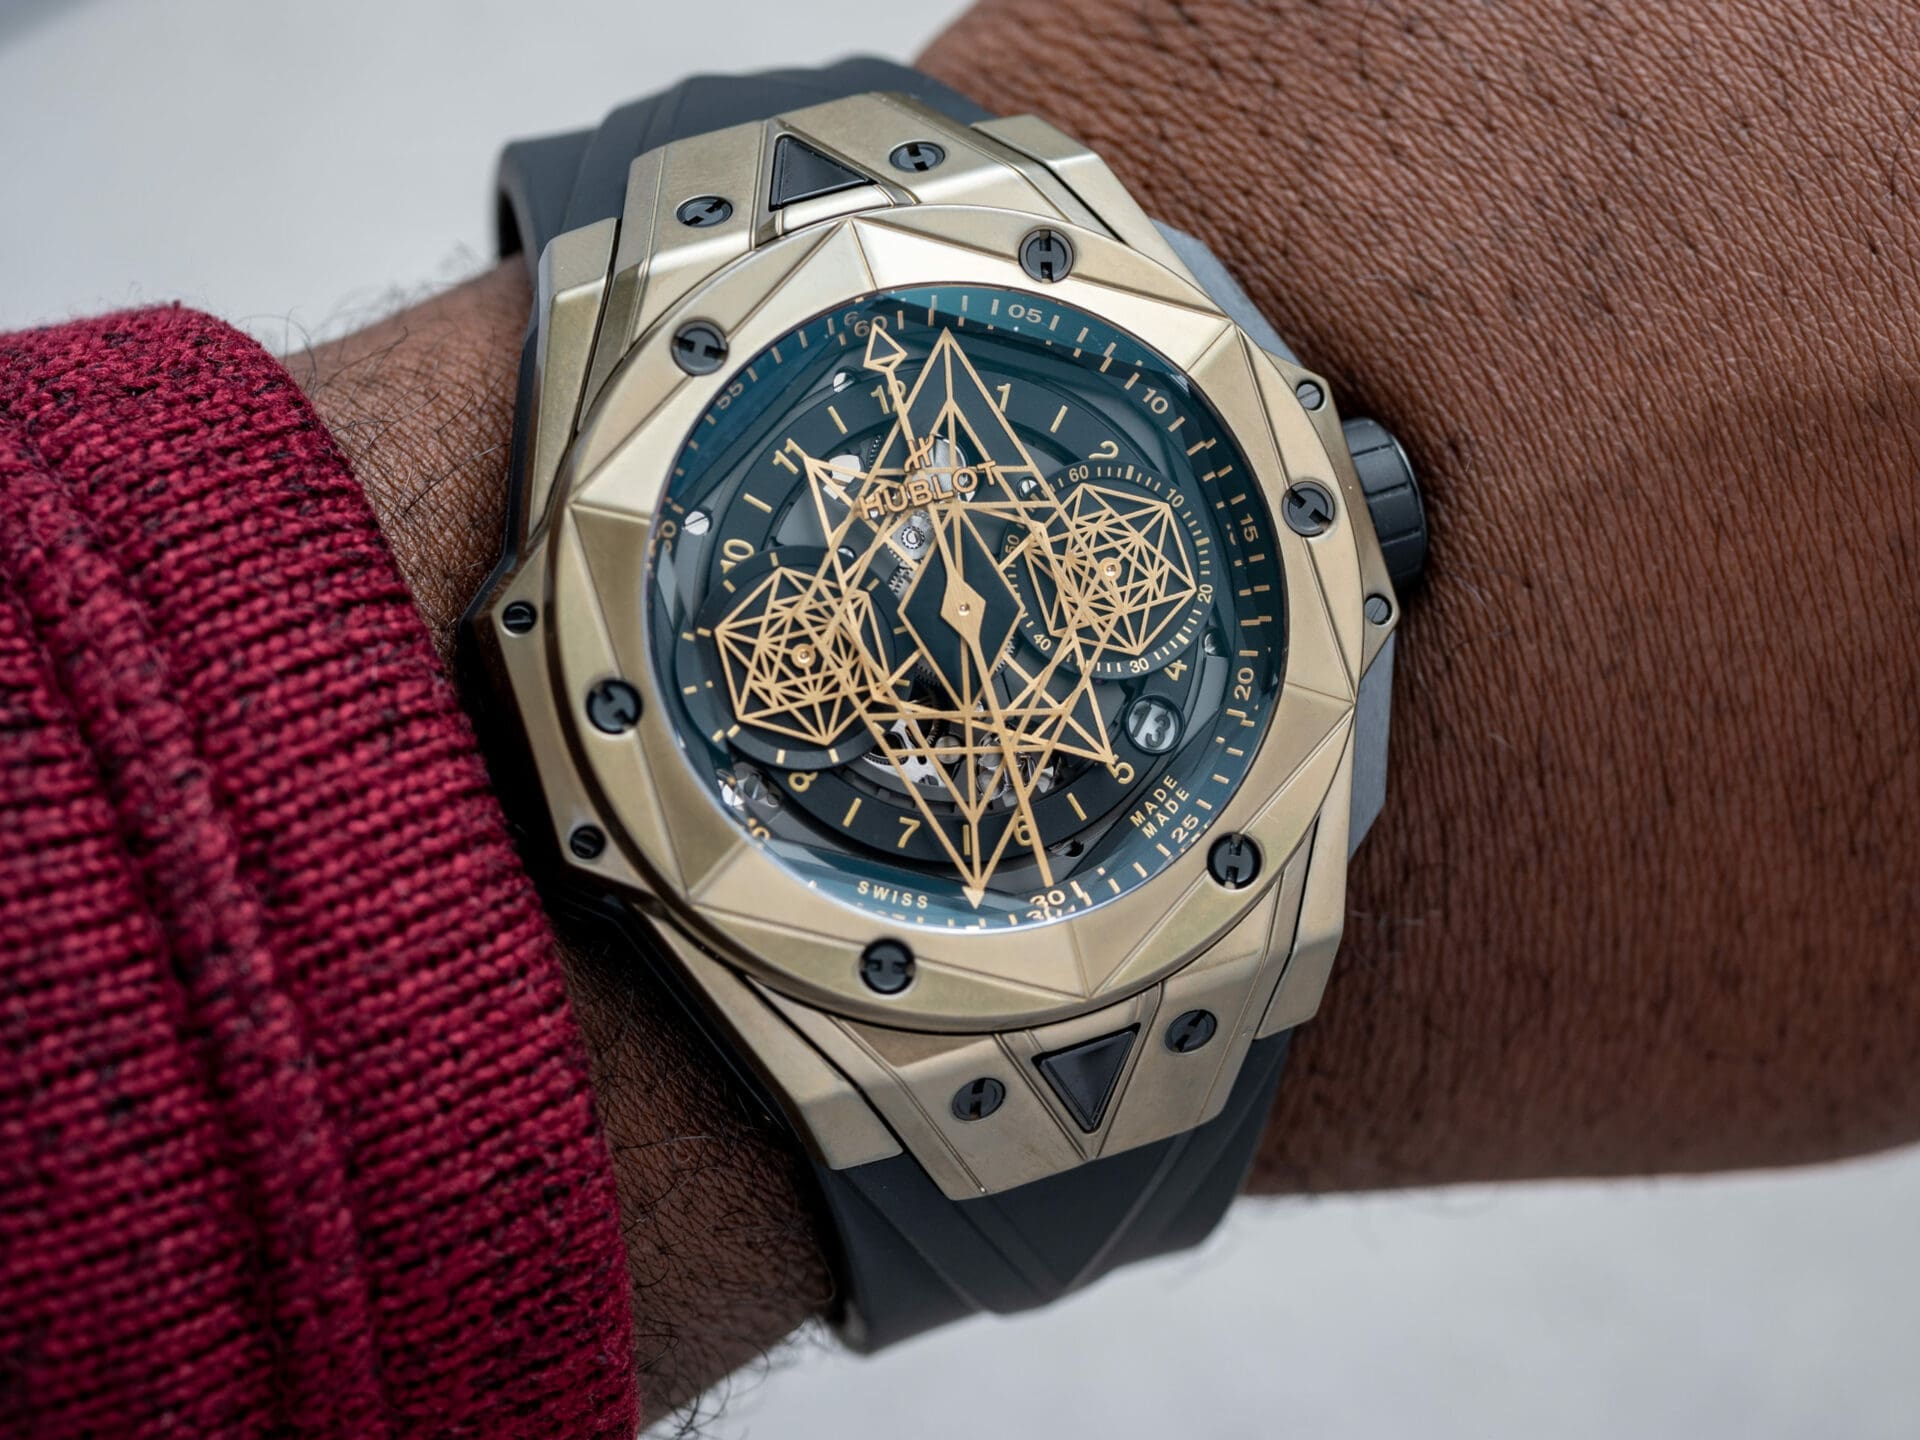 HANDS-ON: Hublot launches three new scratch-resistant iterations of the Big Bang Sang Bleu II in ceramic and Magic Gold